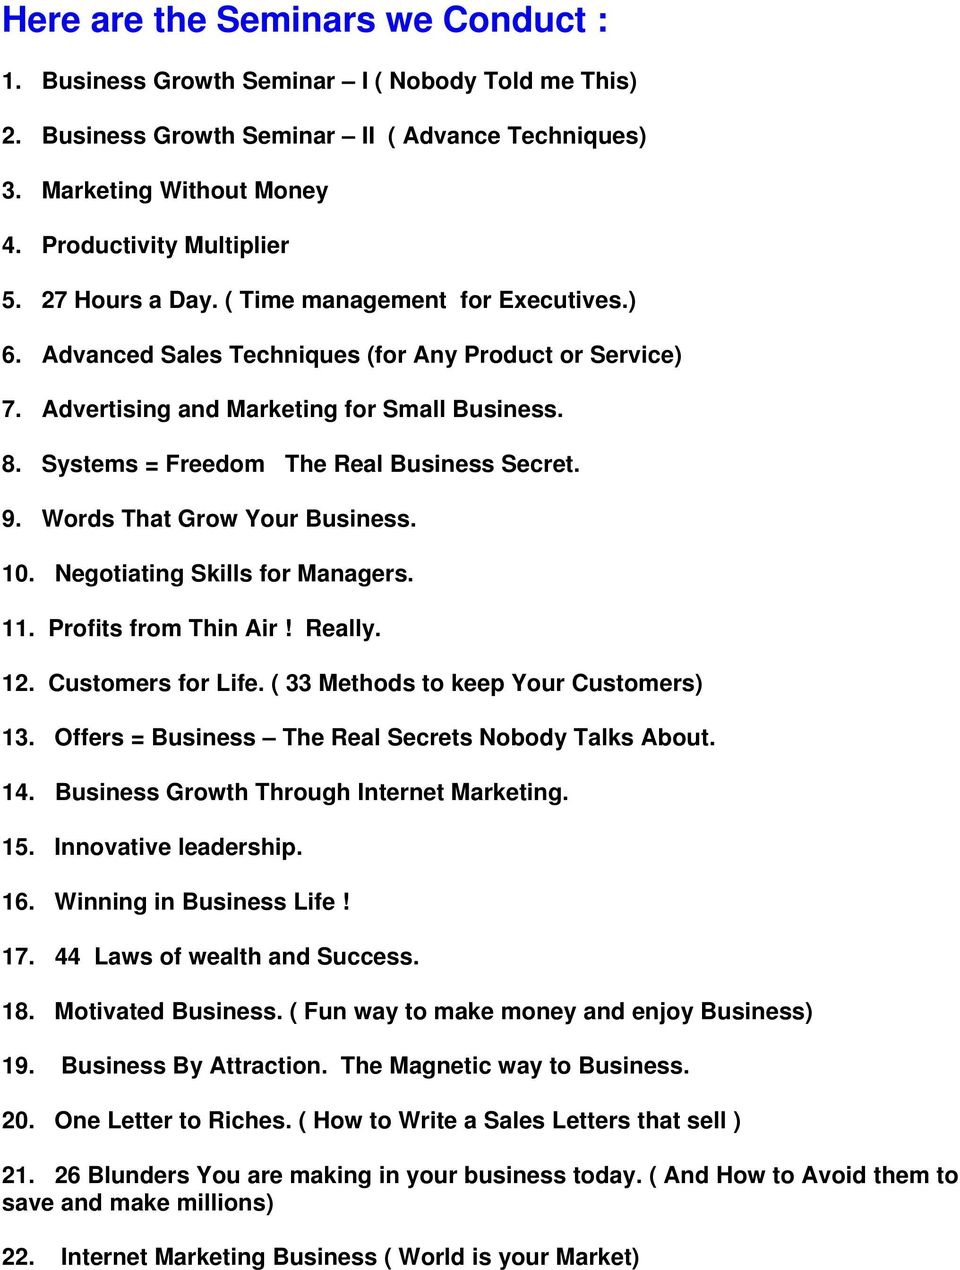 Systems = Freedom The Real Business Secret. 9. Words That Grow Your Business. 10. Negotiating Skills for Managers. 11. Profits from Thin Air! Really. 12. Customers for Life.